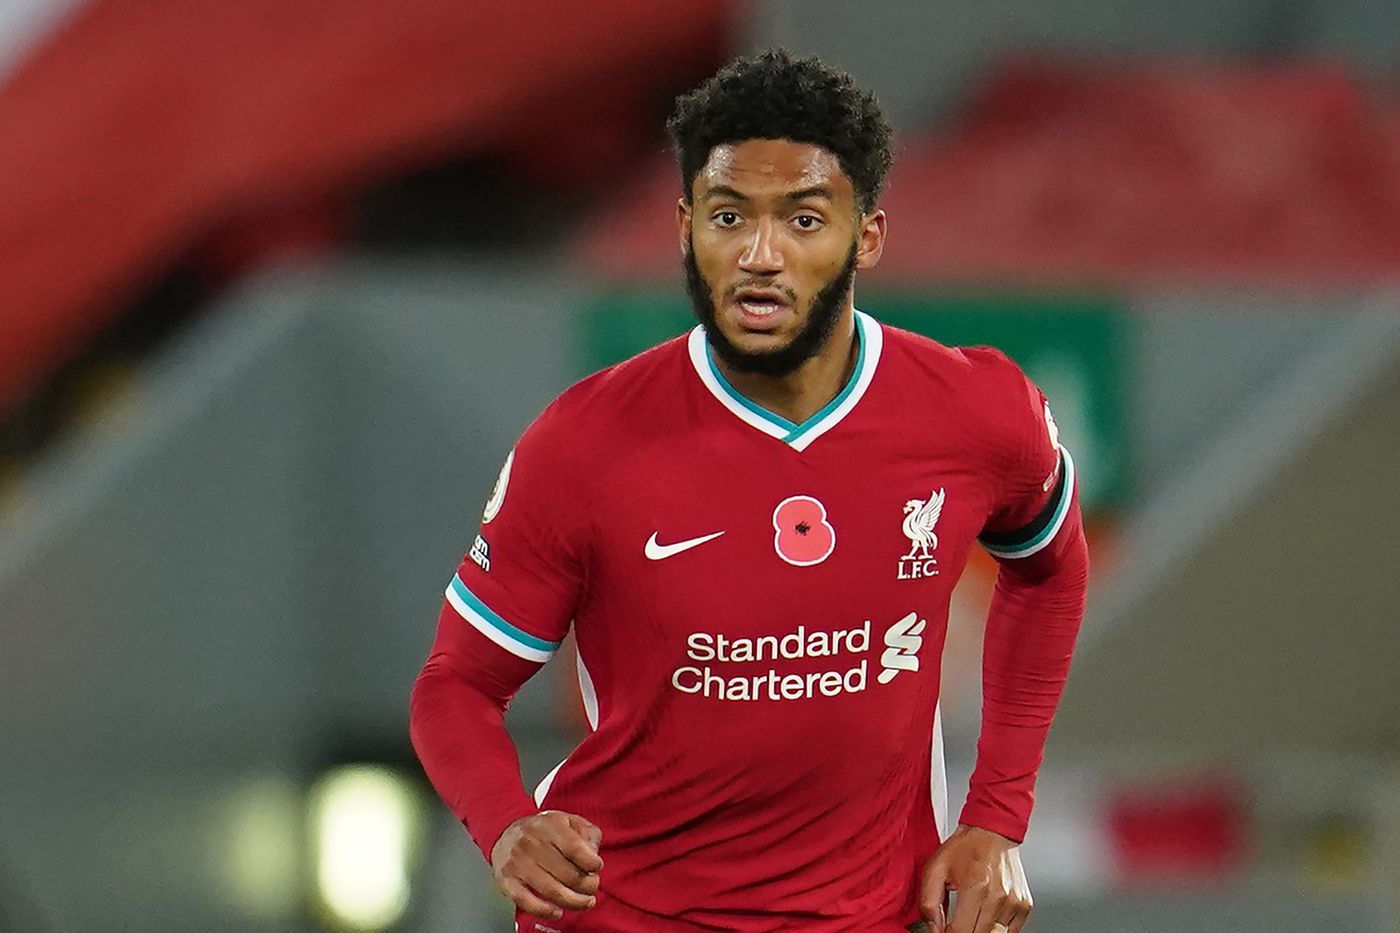 Klopp Talk: Joe Gomez “Showing His Best Qualities On And Off The Pitch” -  The Liverpool Offside